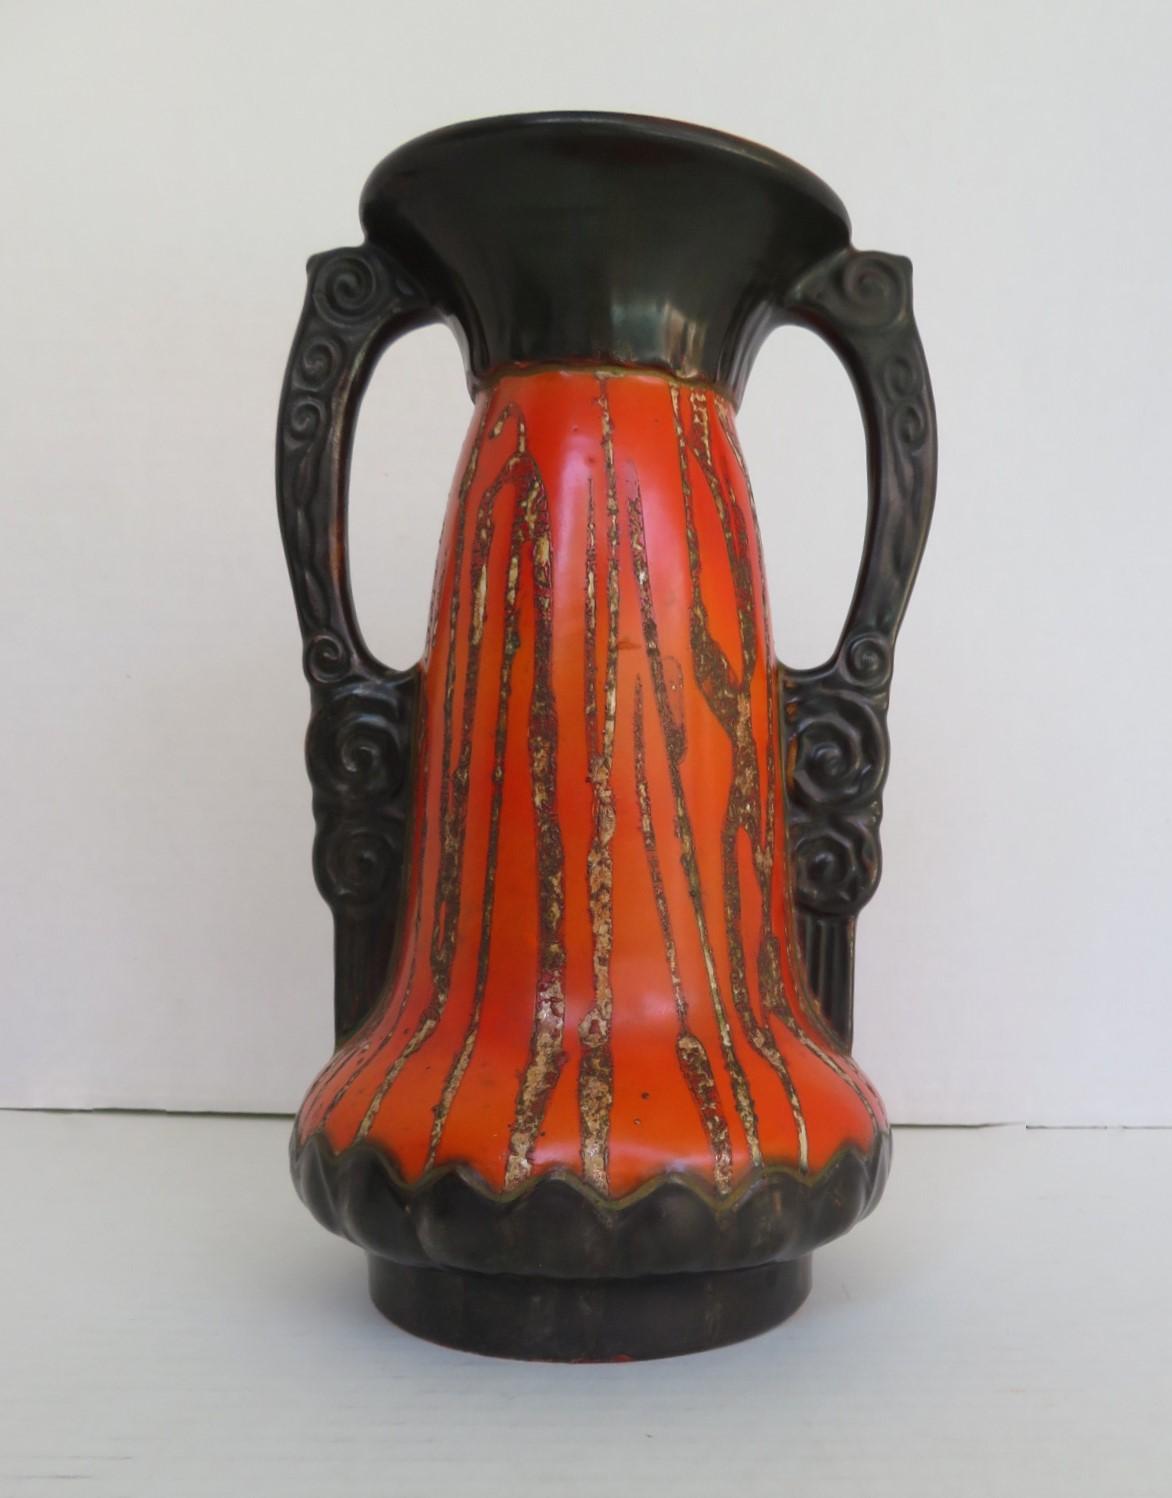 Reduced from $325....In vivid tomato red and gun metal black, a tall pre-war 1930s ceramic Art Nouveau vase with handles from former Czechoslovakia. Decorated with fluid scrolls on the handles and drips running through a red glazed body. Stamped on